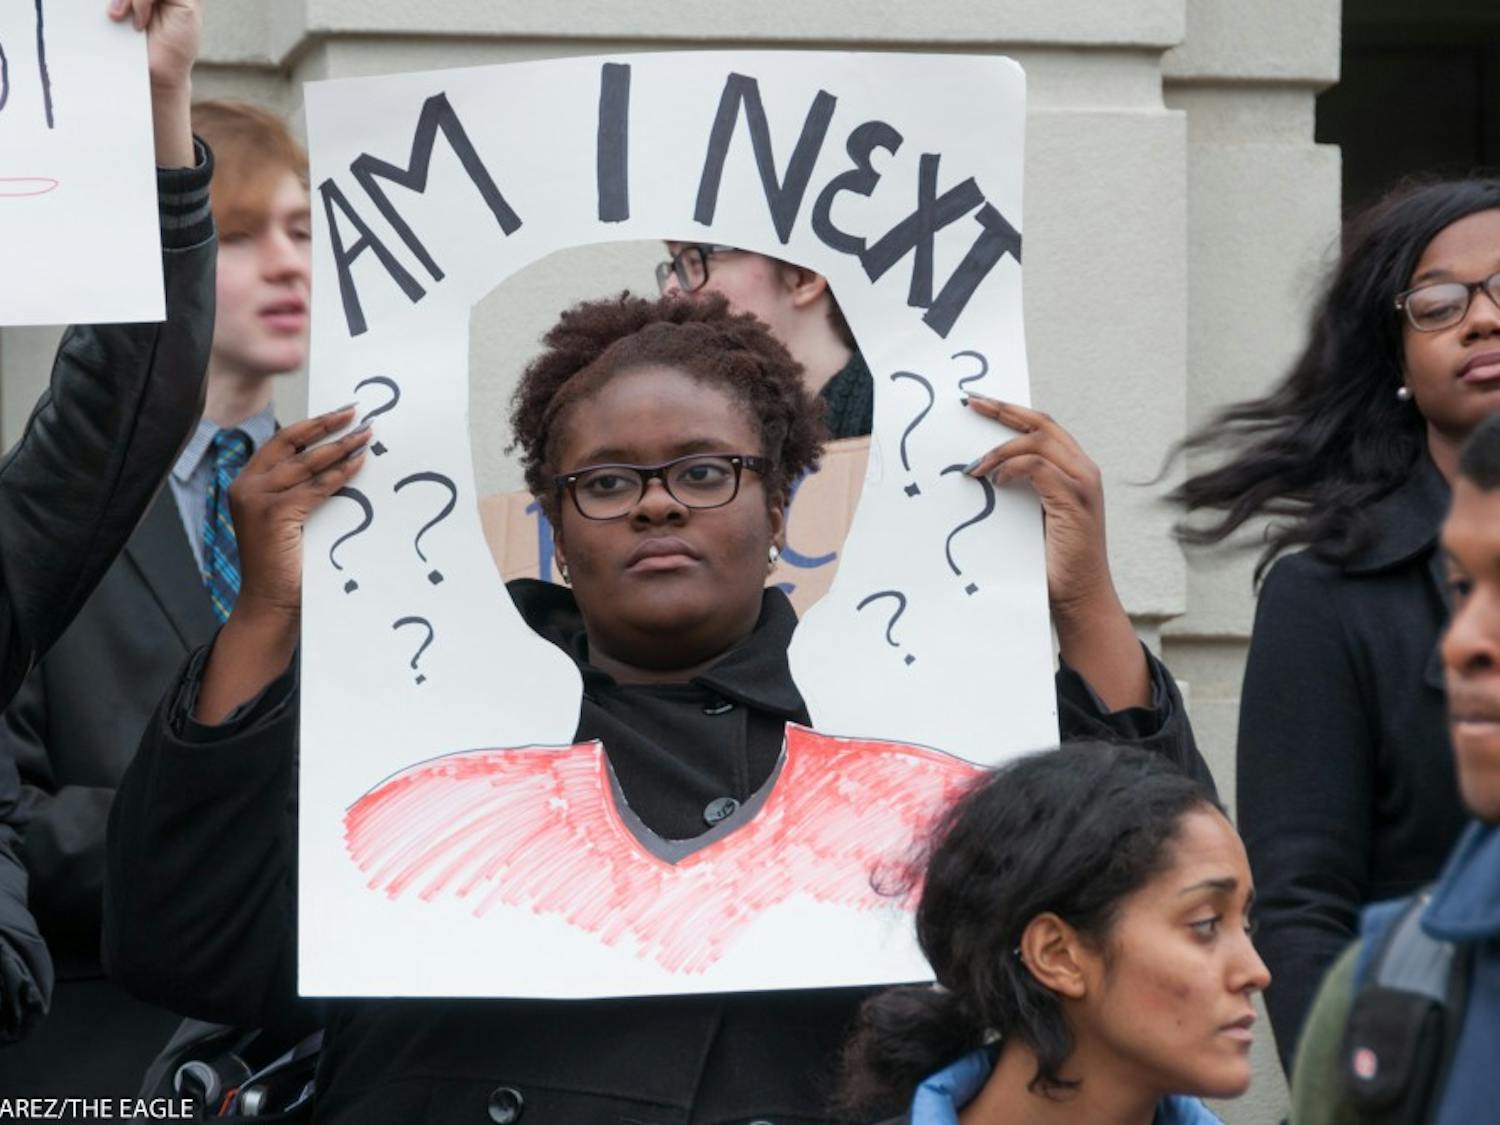 Photo: A student demonstrates at "The Darkening,"  an Dec. 3 movement in solidarity with the national "Black Lives Matter" movement.